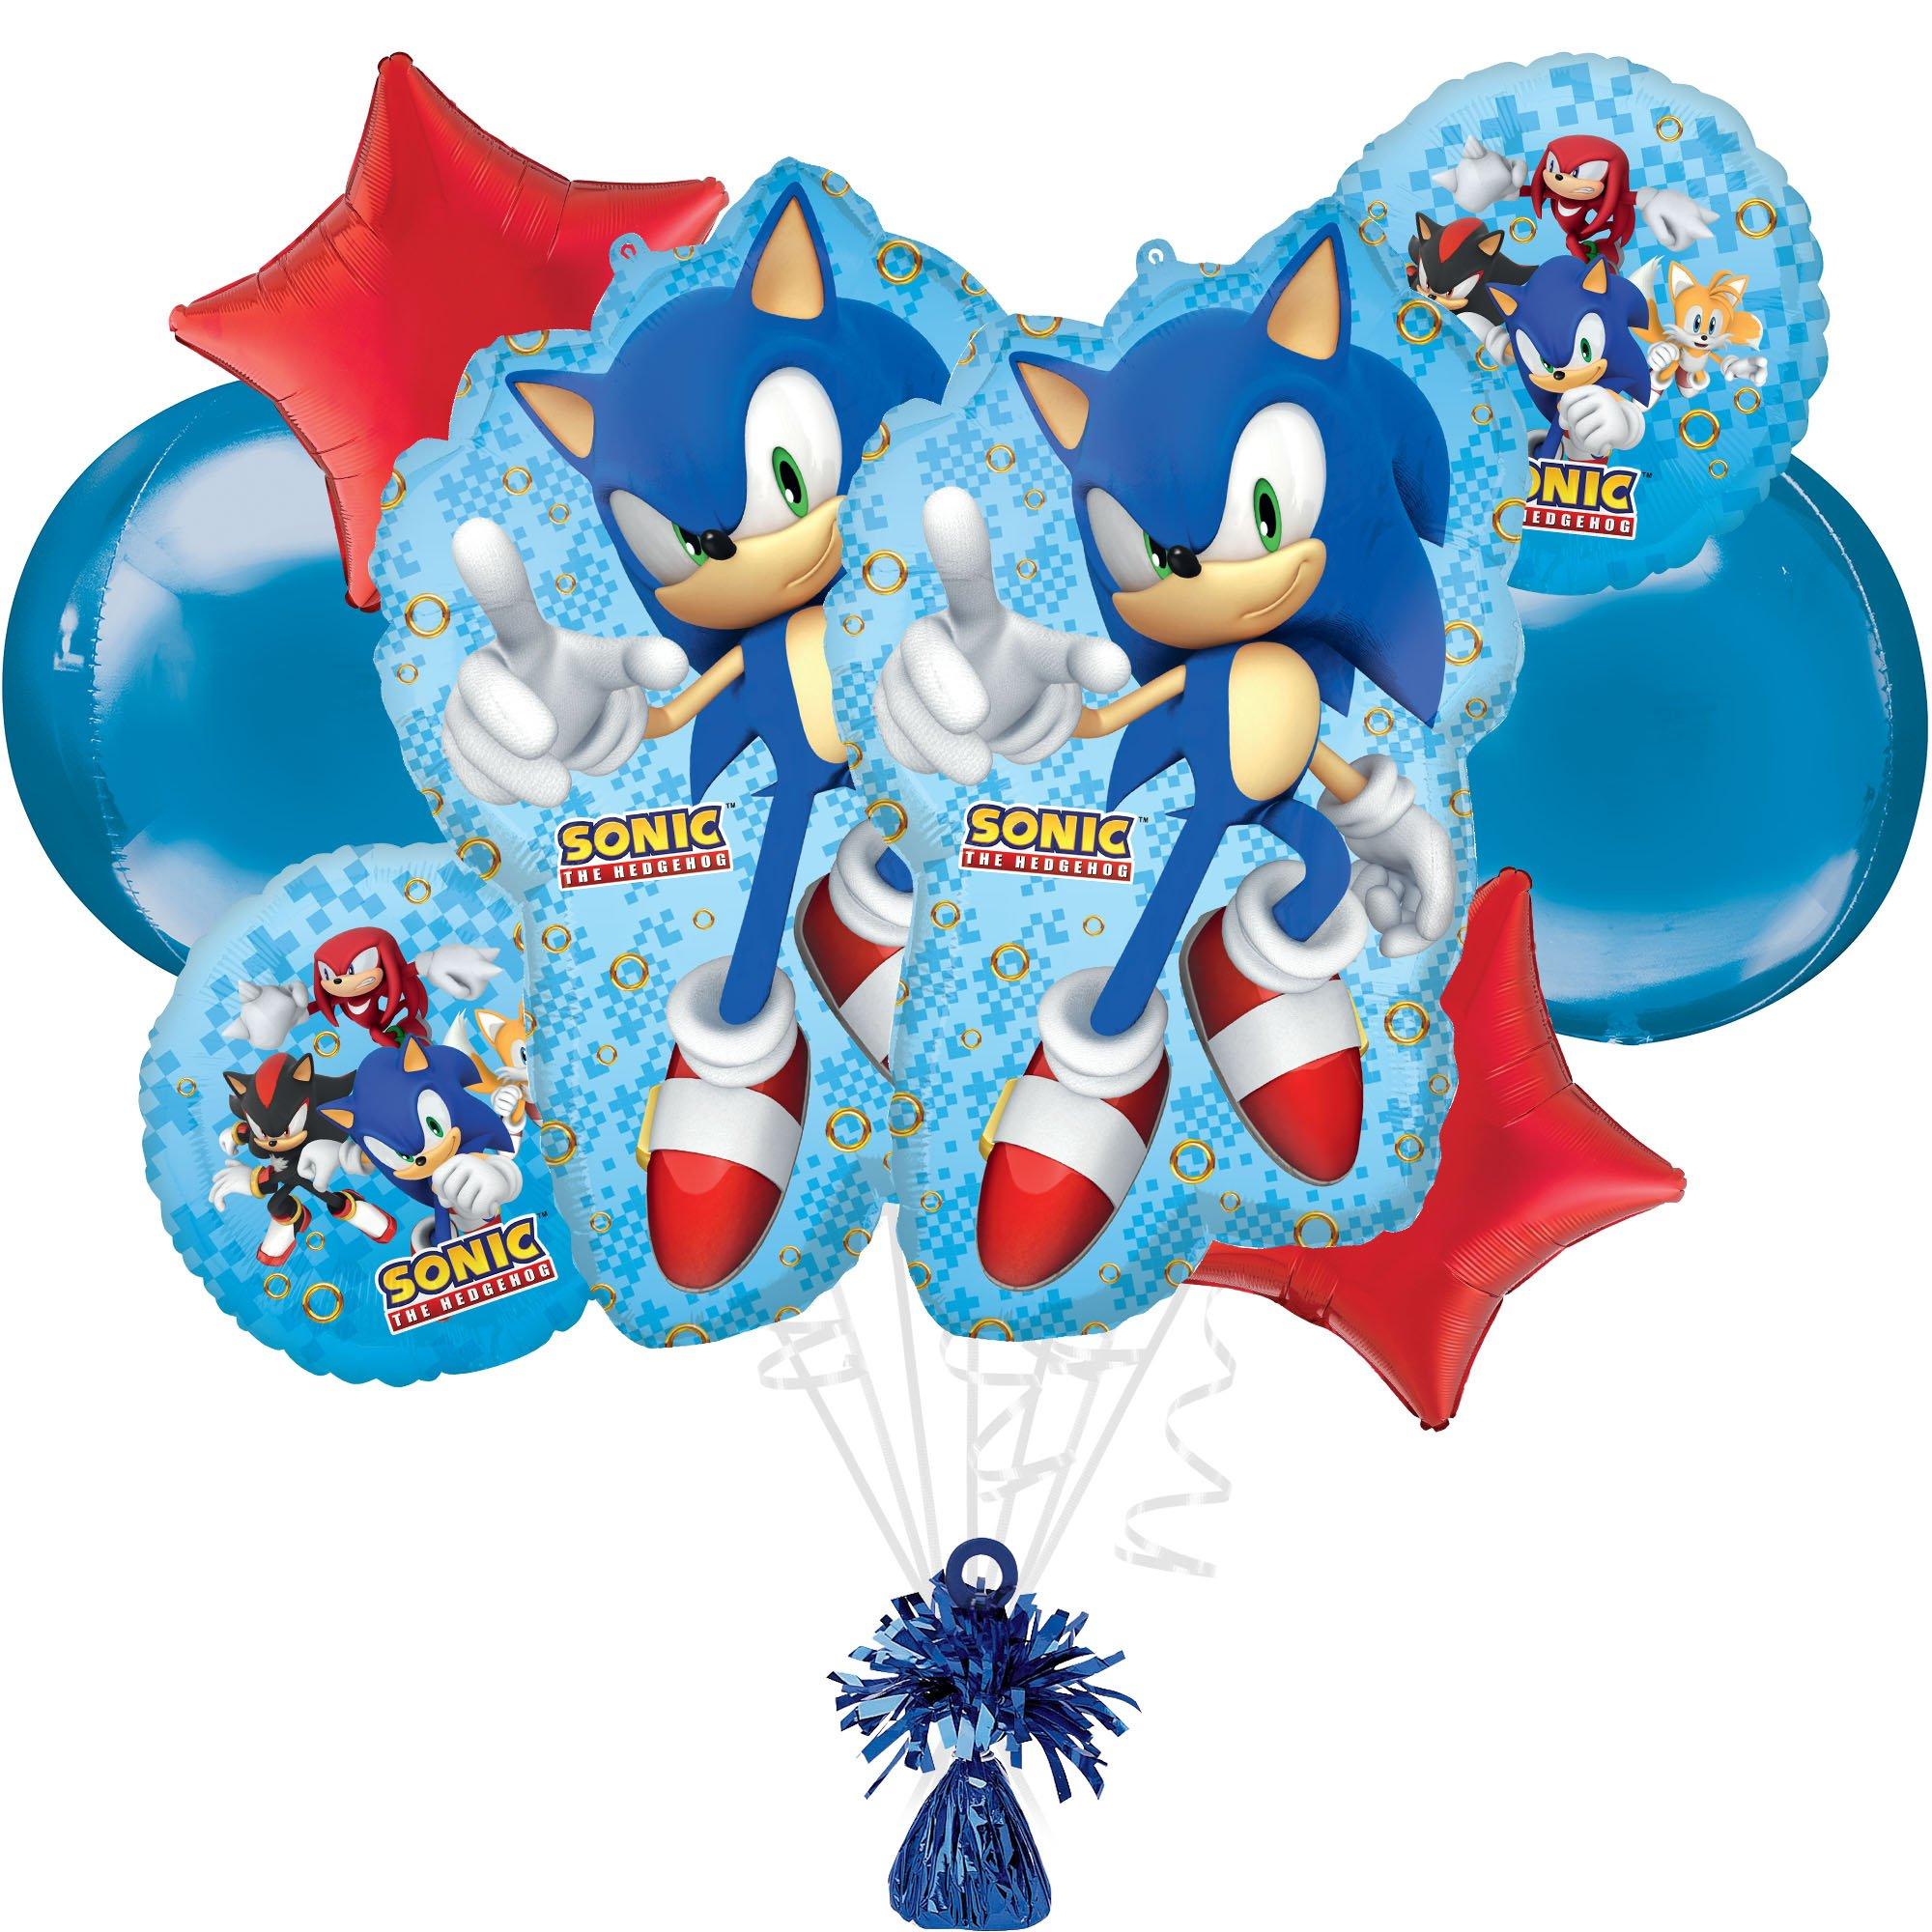 Sonic The Hedgehog 9th Birthday Party Supplies and Balloon Decorations